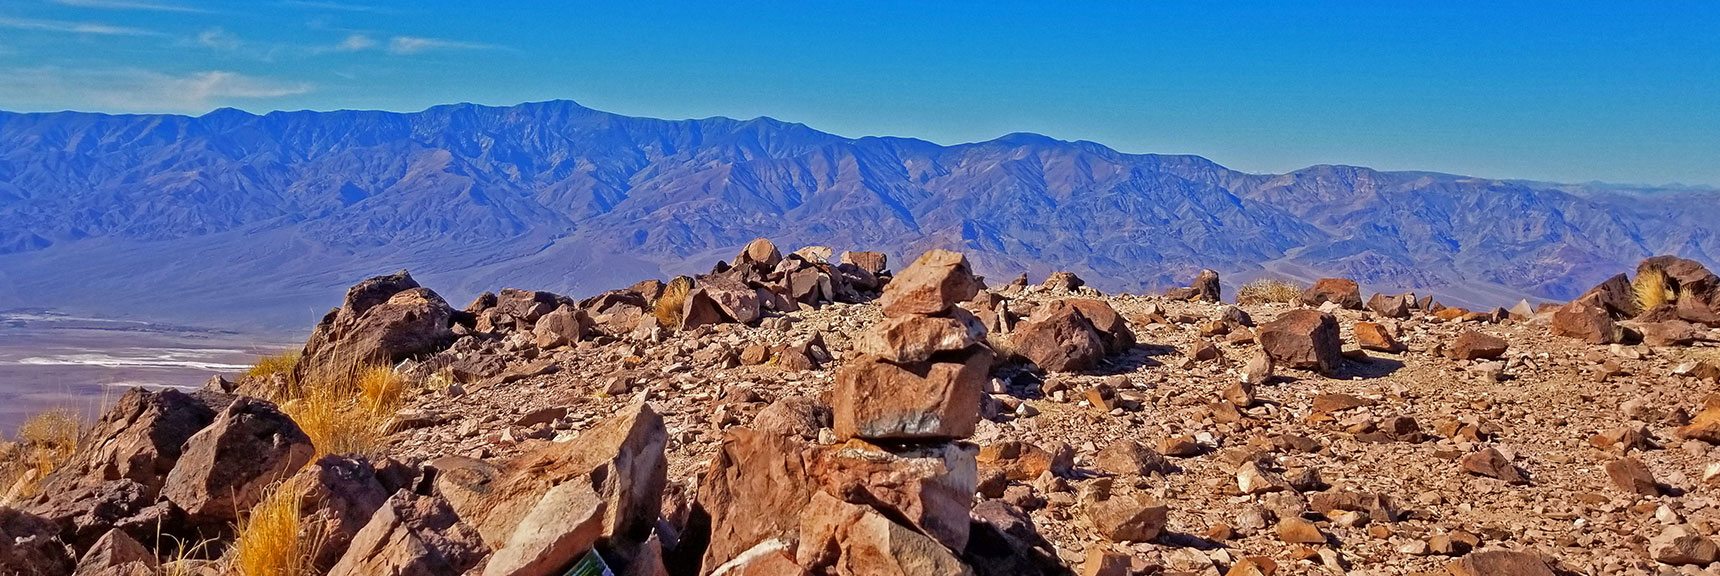 Arrival at Mt. Perry Summit. Cairn Marks the Spot. | Dante's View to Mt. Perry | Death Valley National Park, CA